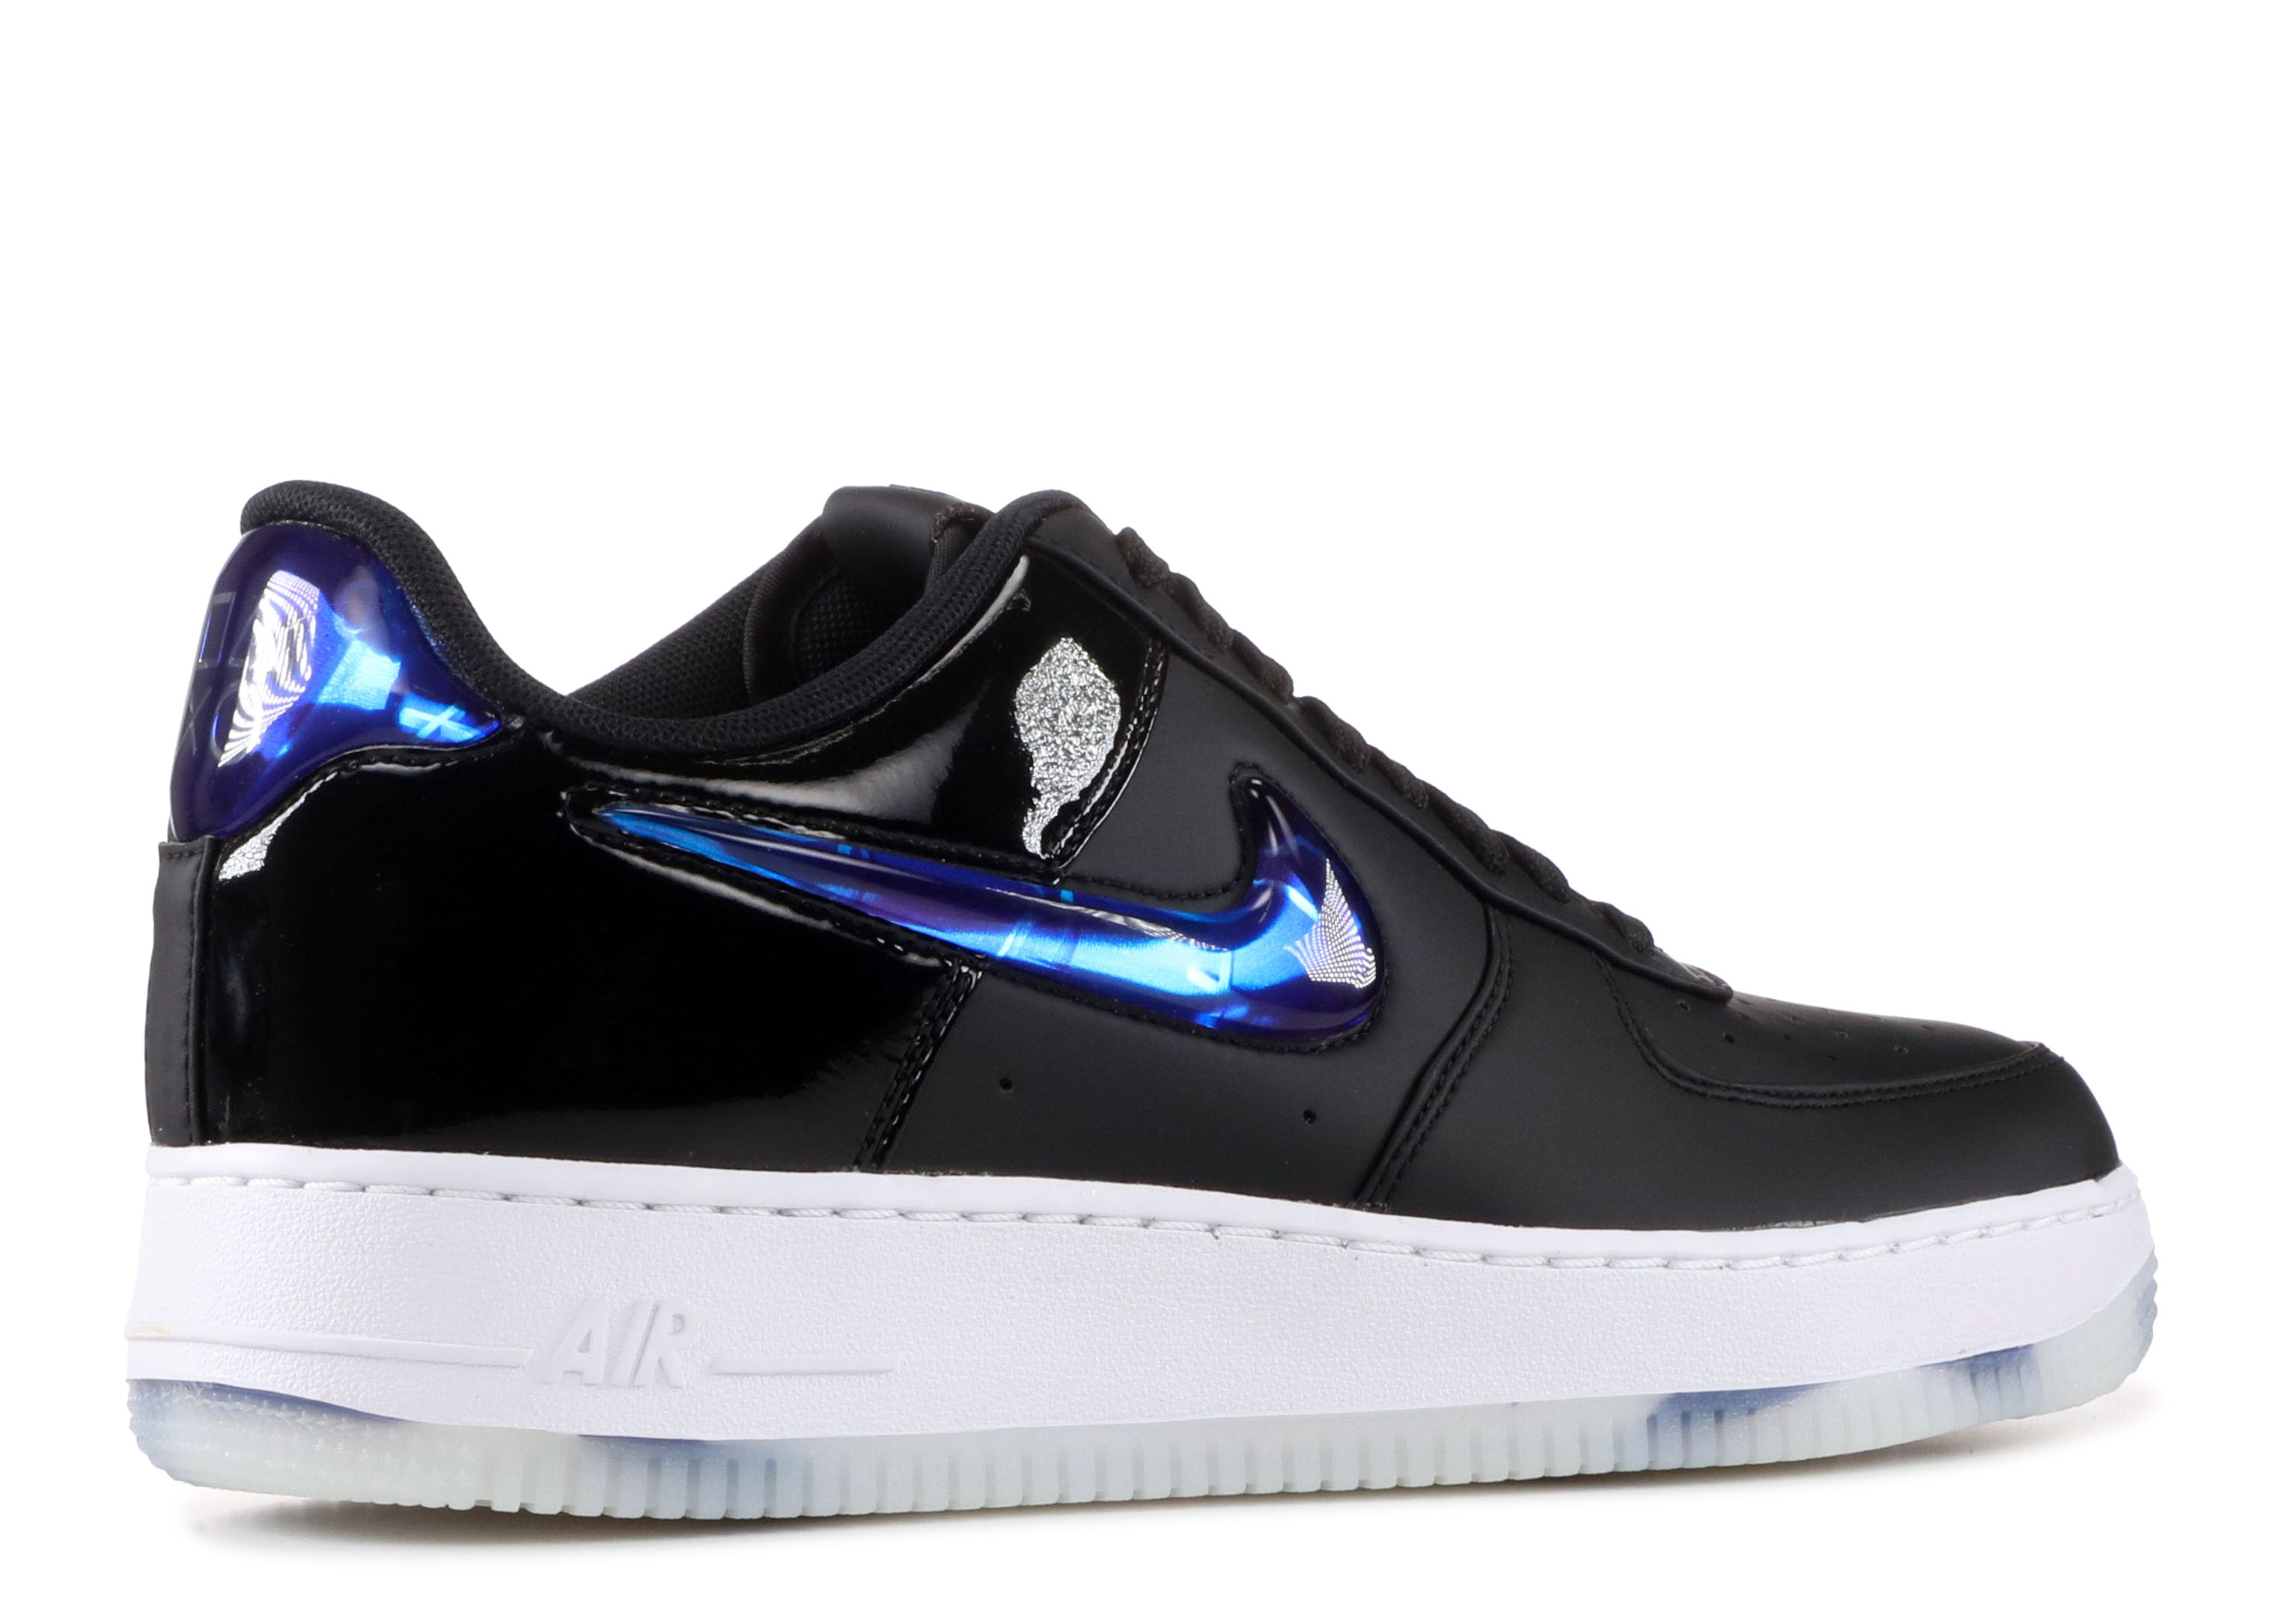 Playstation X Air Force 1 Low '18 QS 